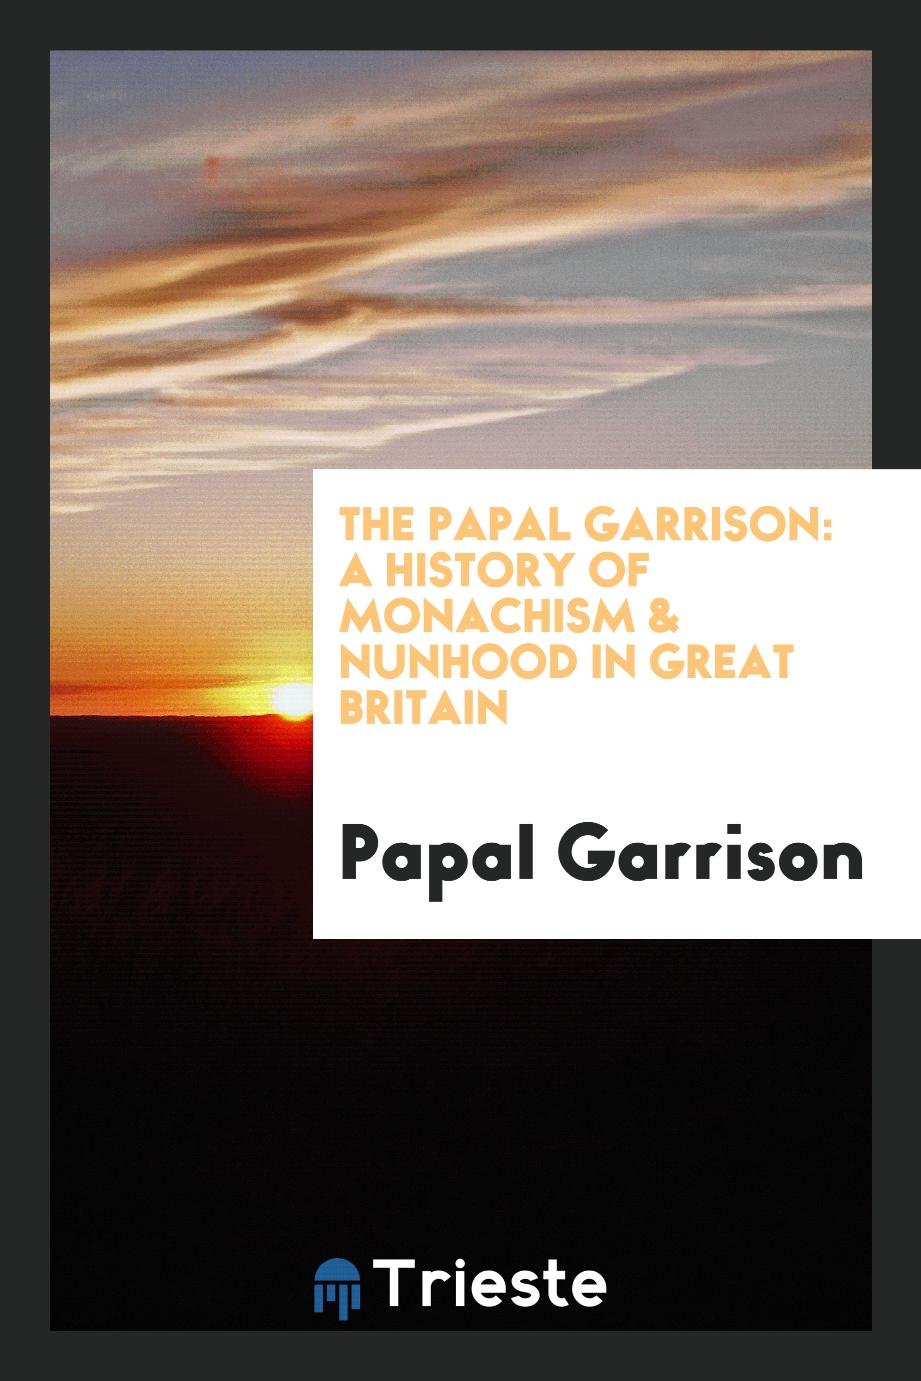 The Papal Garrison: A History of Monachism & Nunhood in Great Britain